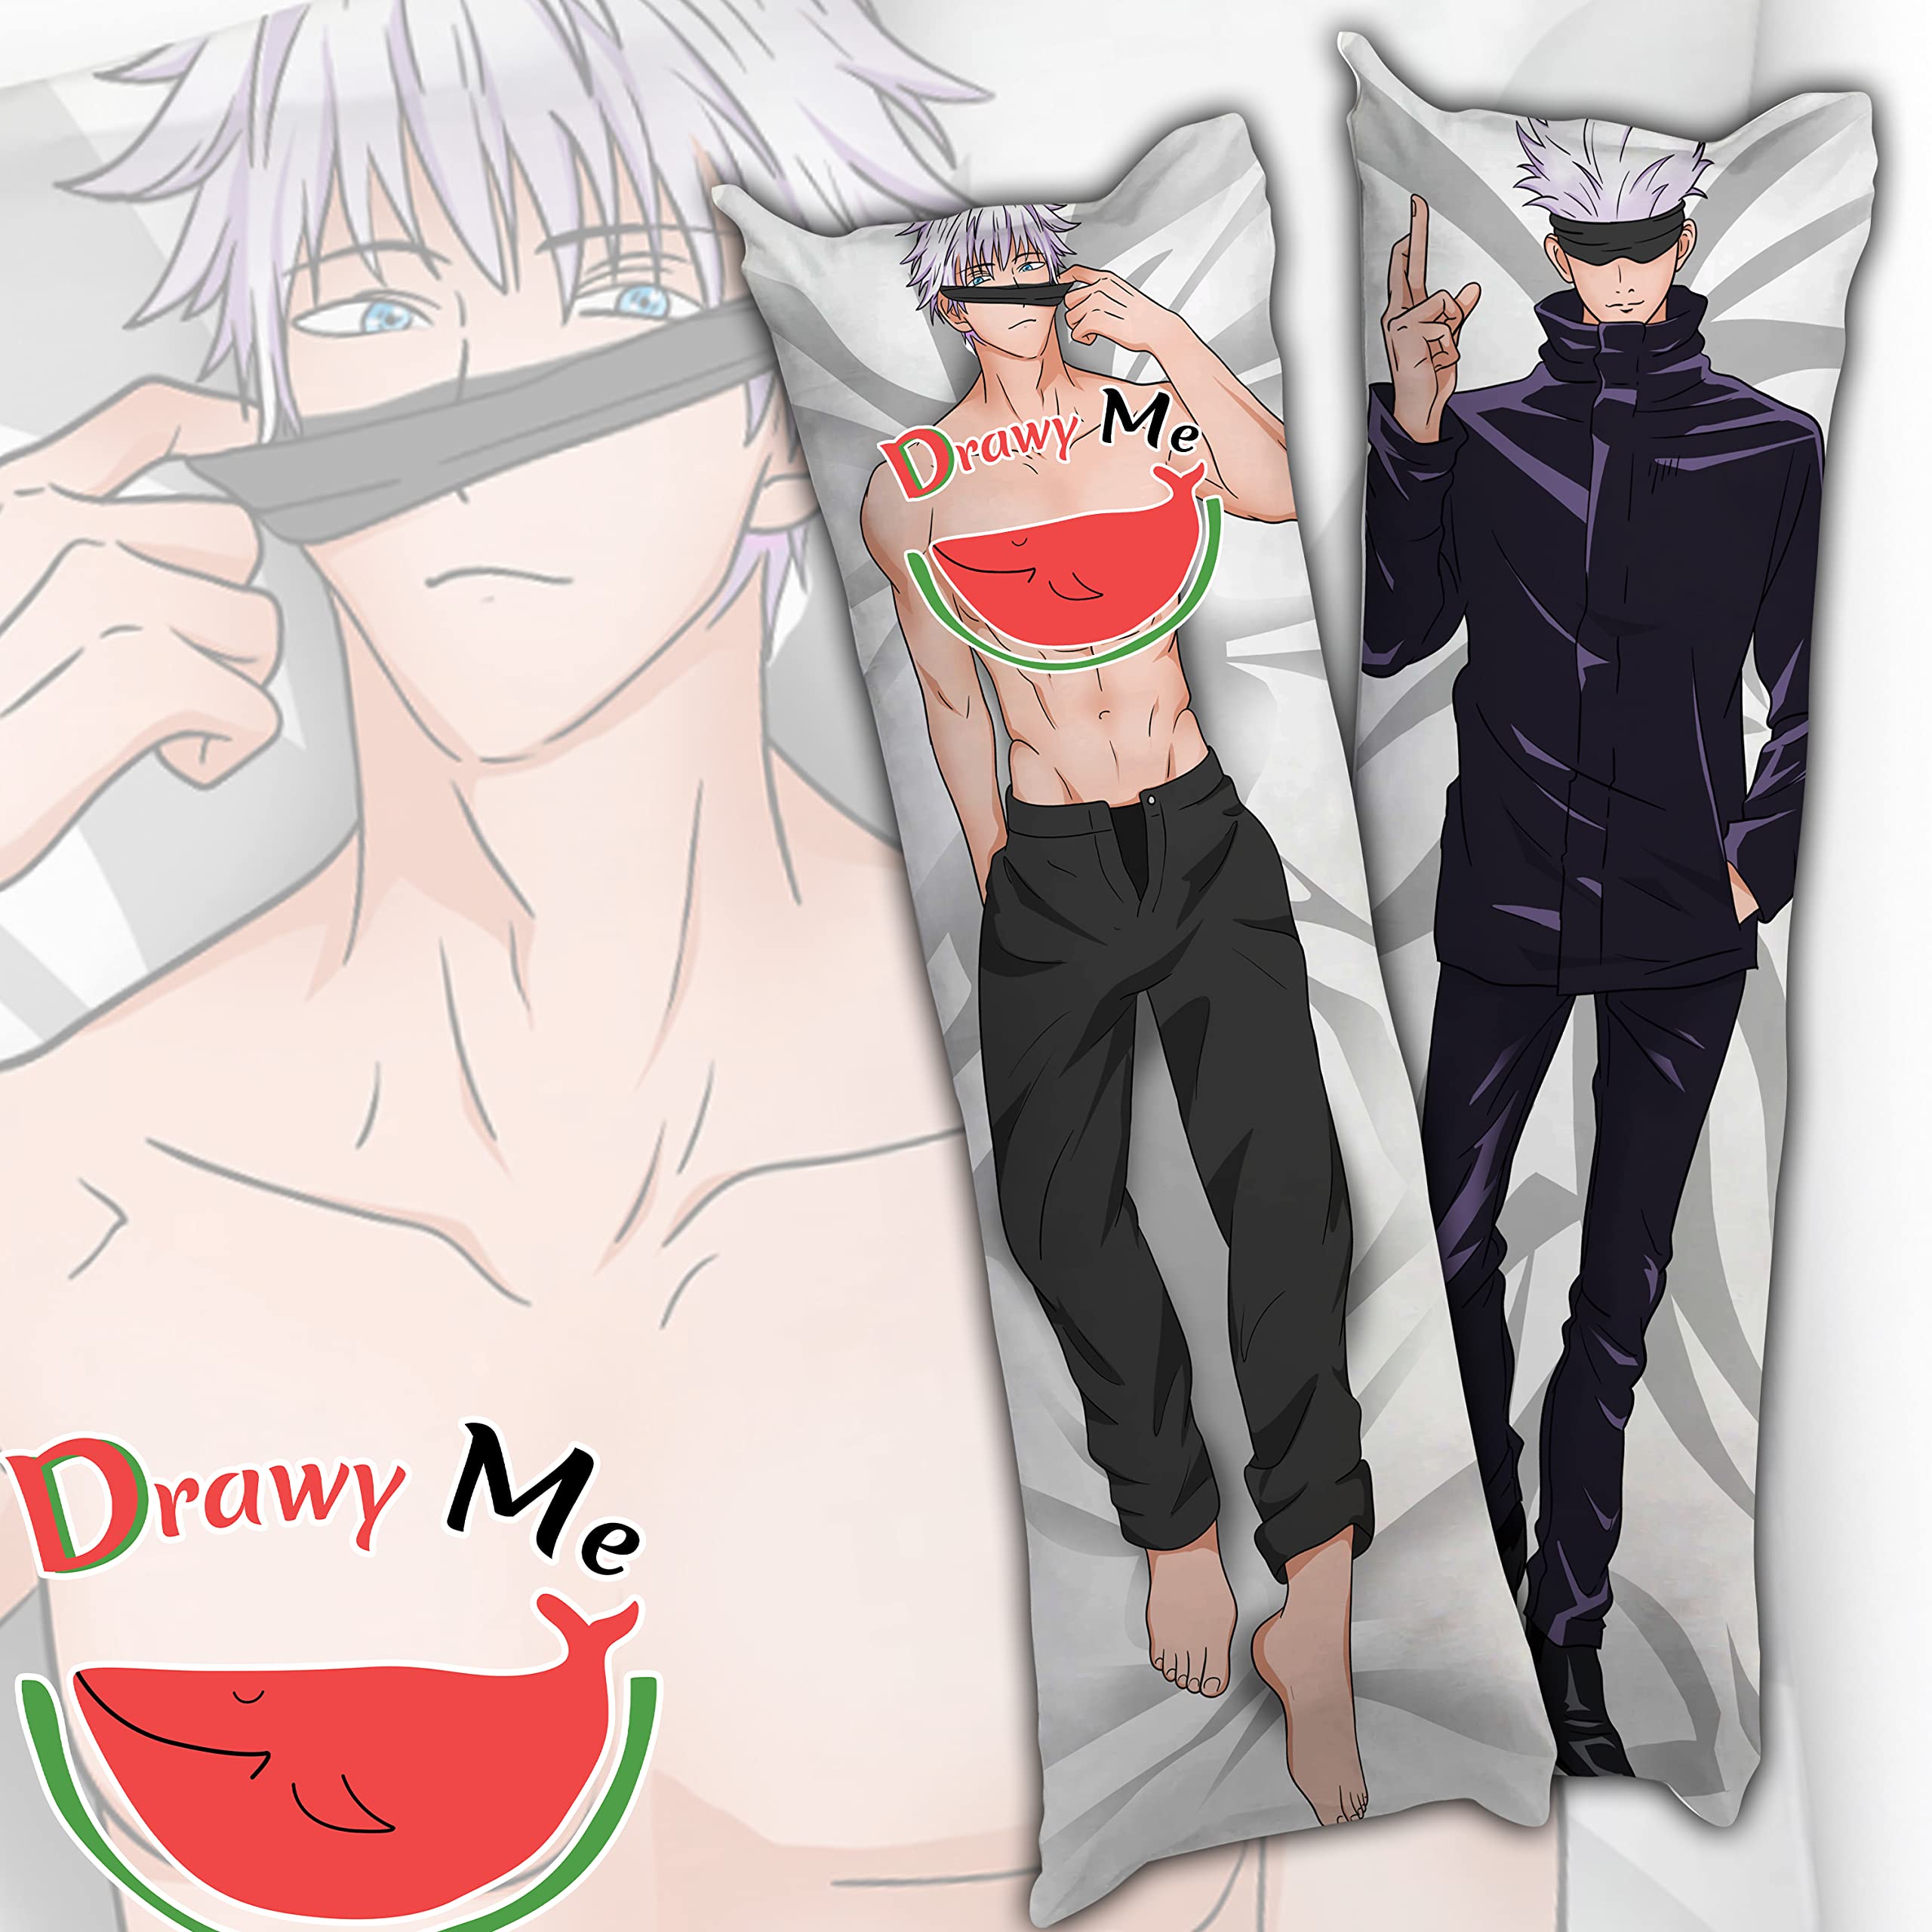 June update Japan Anime Games Girls Frontline characters sexy girl  Dakimakura body pillow case cover hugging throw pillowcases - Price history  & Review | AliExpress Seller - Coscase Store | Alitools.io